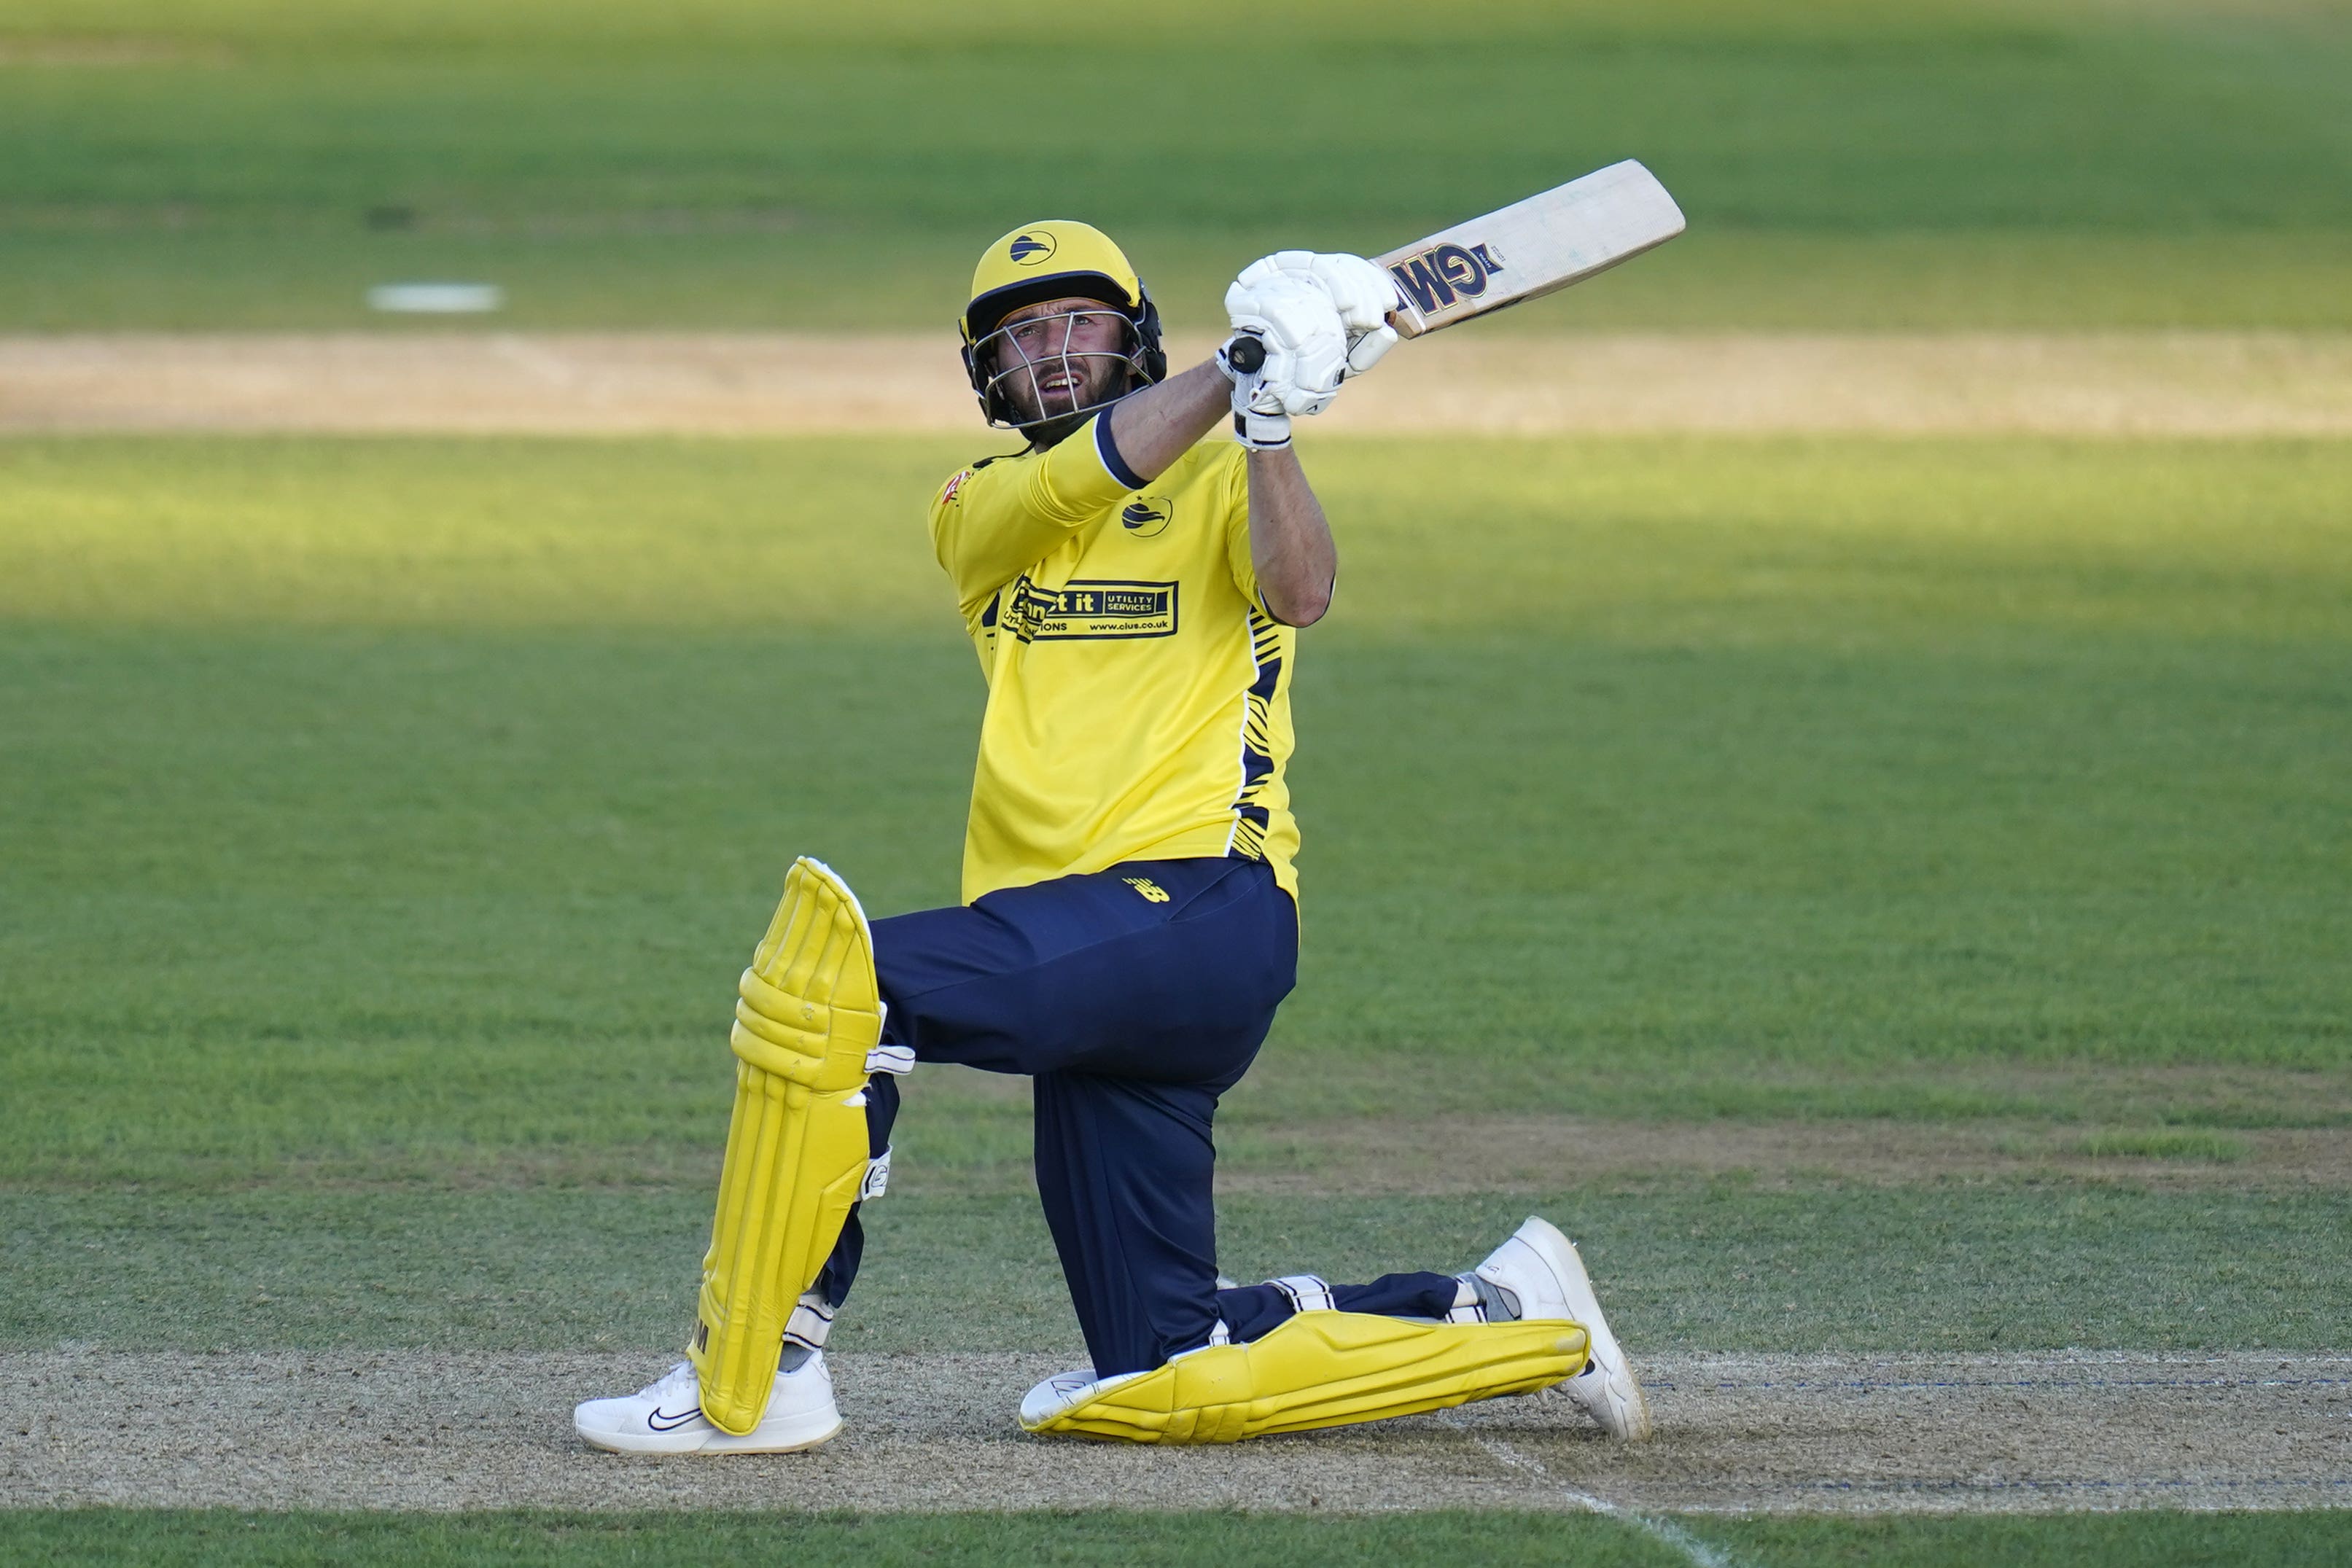 Hampshire’s James Vince maintained his fine form with an unbeaten 62 in his side’s win against Surrey (Andrew Matthews/PA)